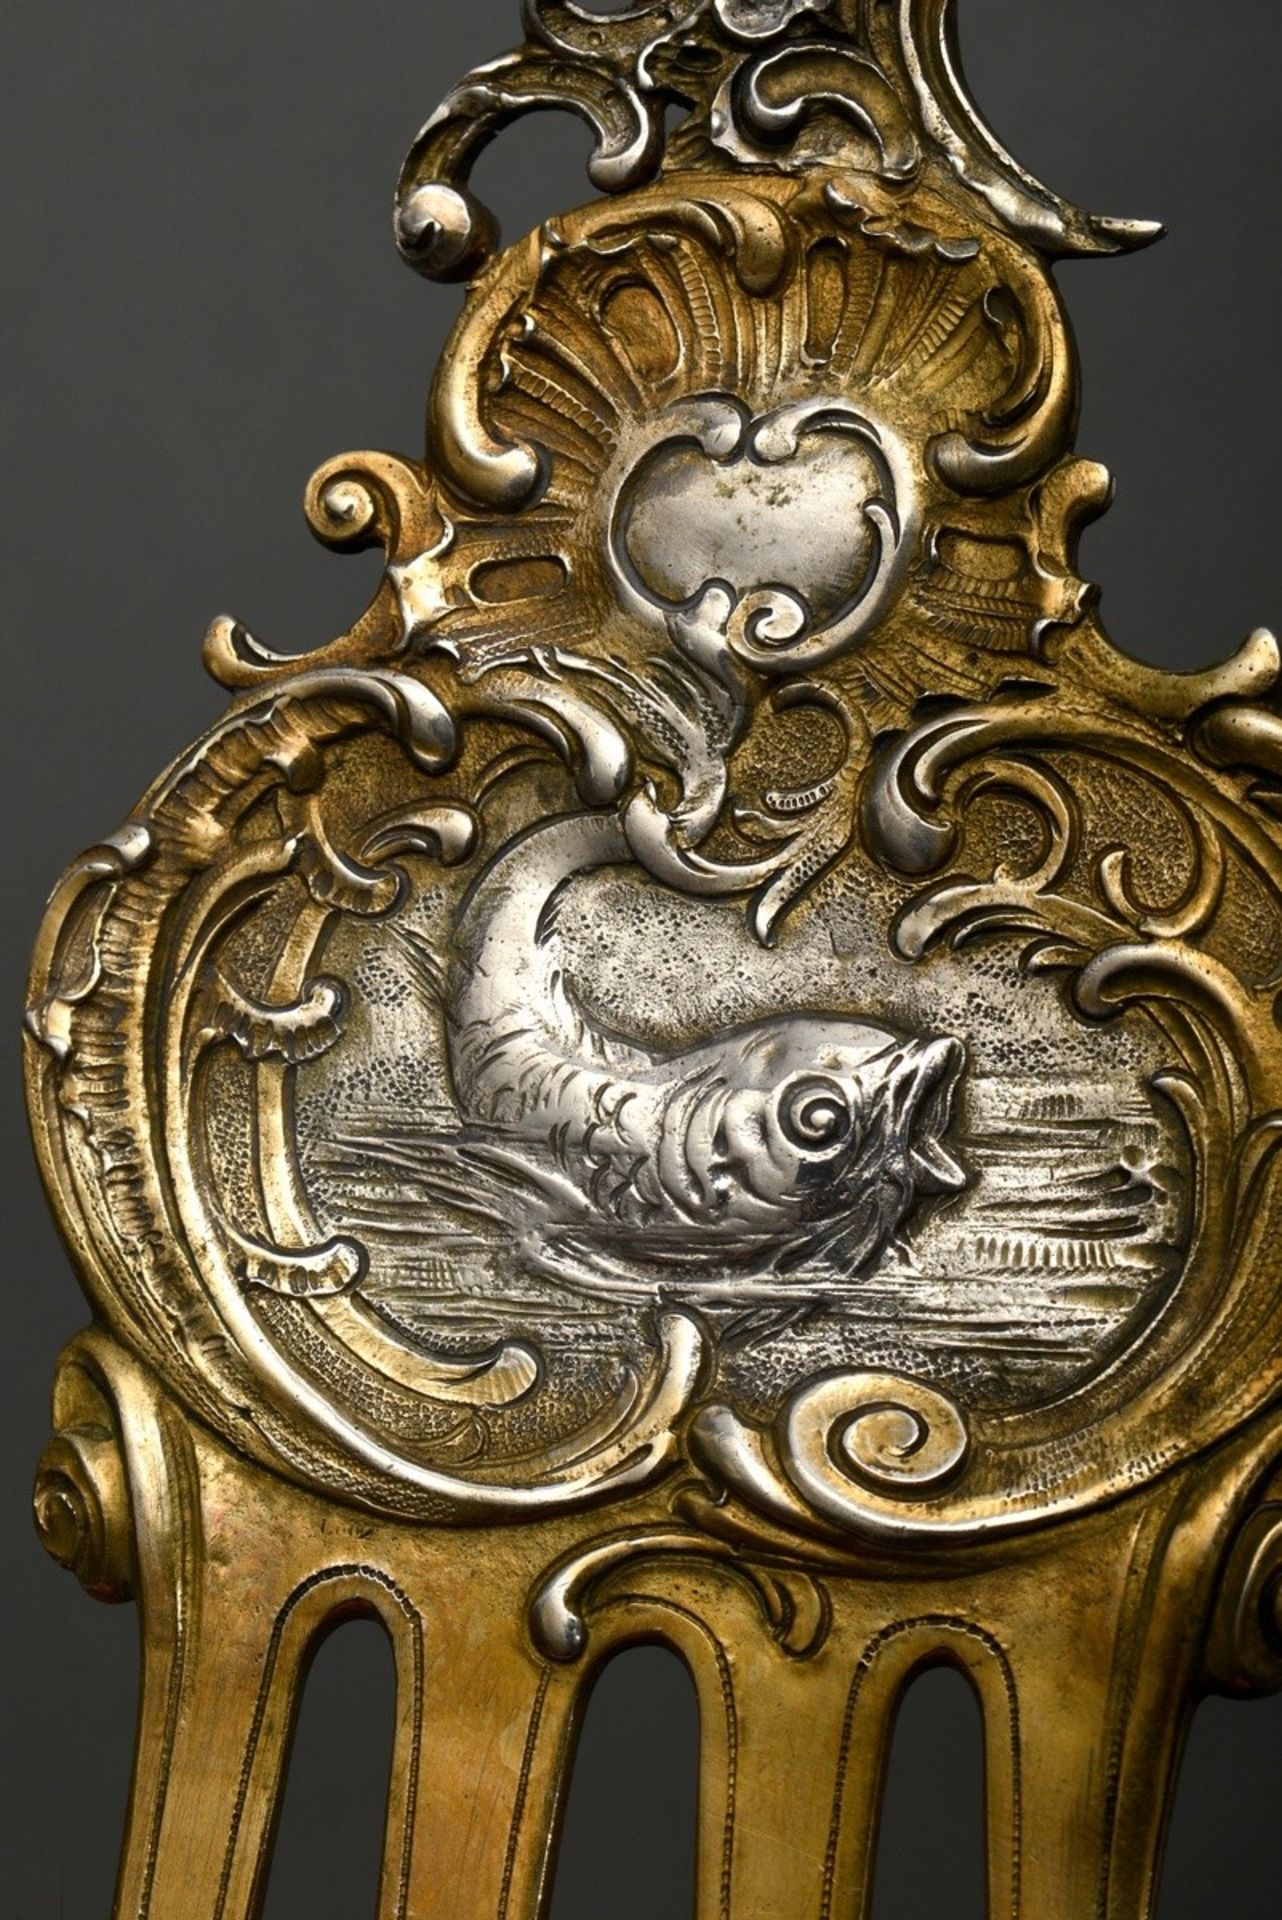 2 Pieces opulent Neo-Rococo fish serving cutlery with sculptural figurative handles and fish relief - Image 3 of 6